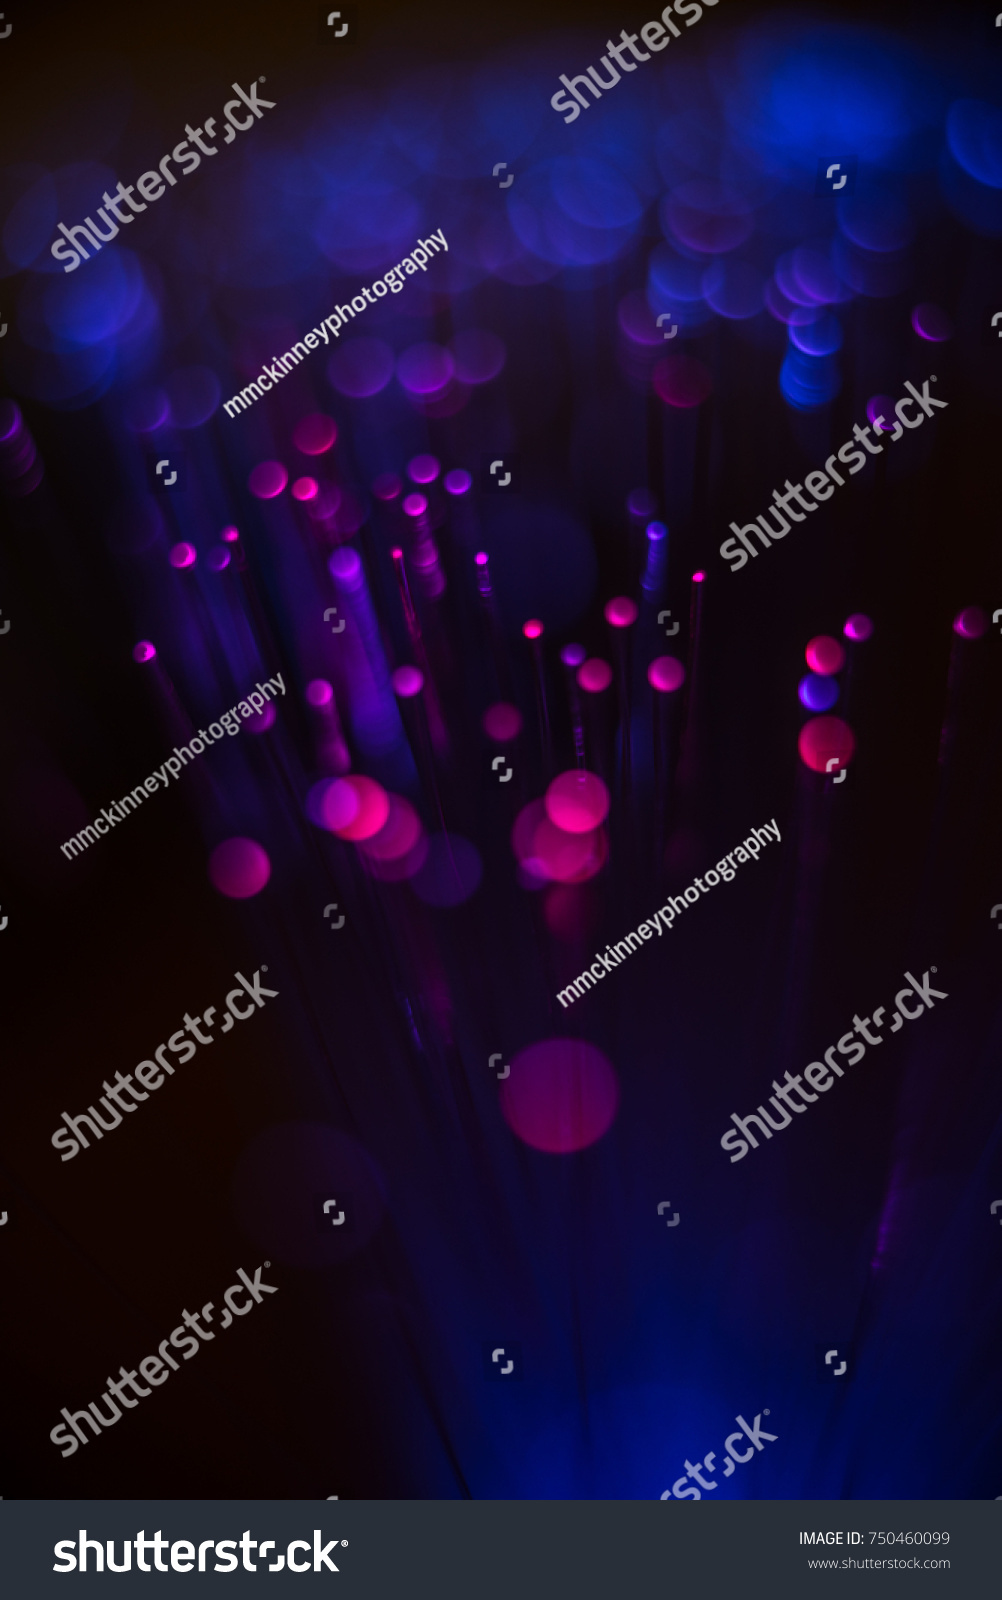 Round spheres of light from fiber optic cables #750460099